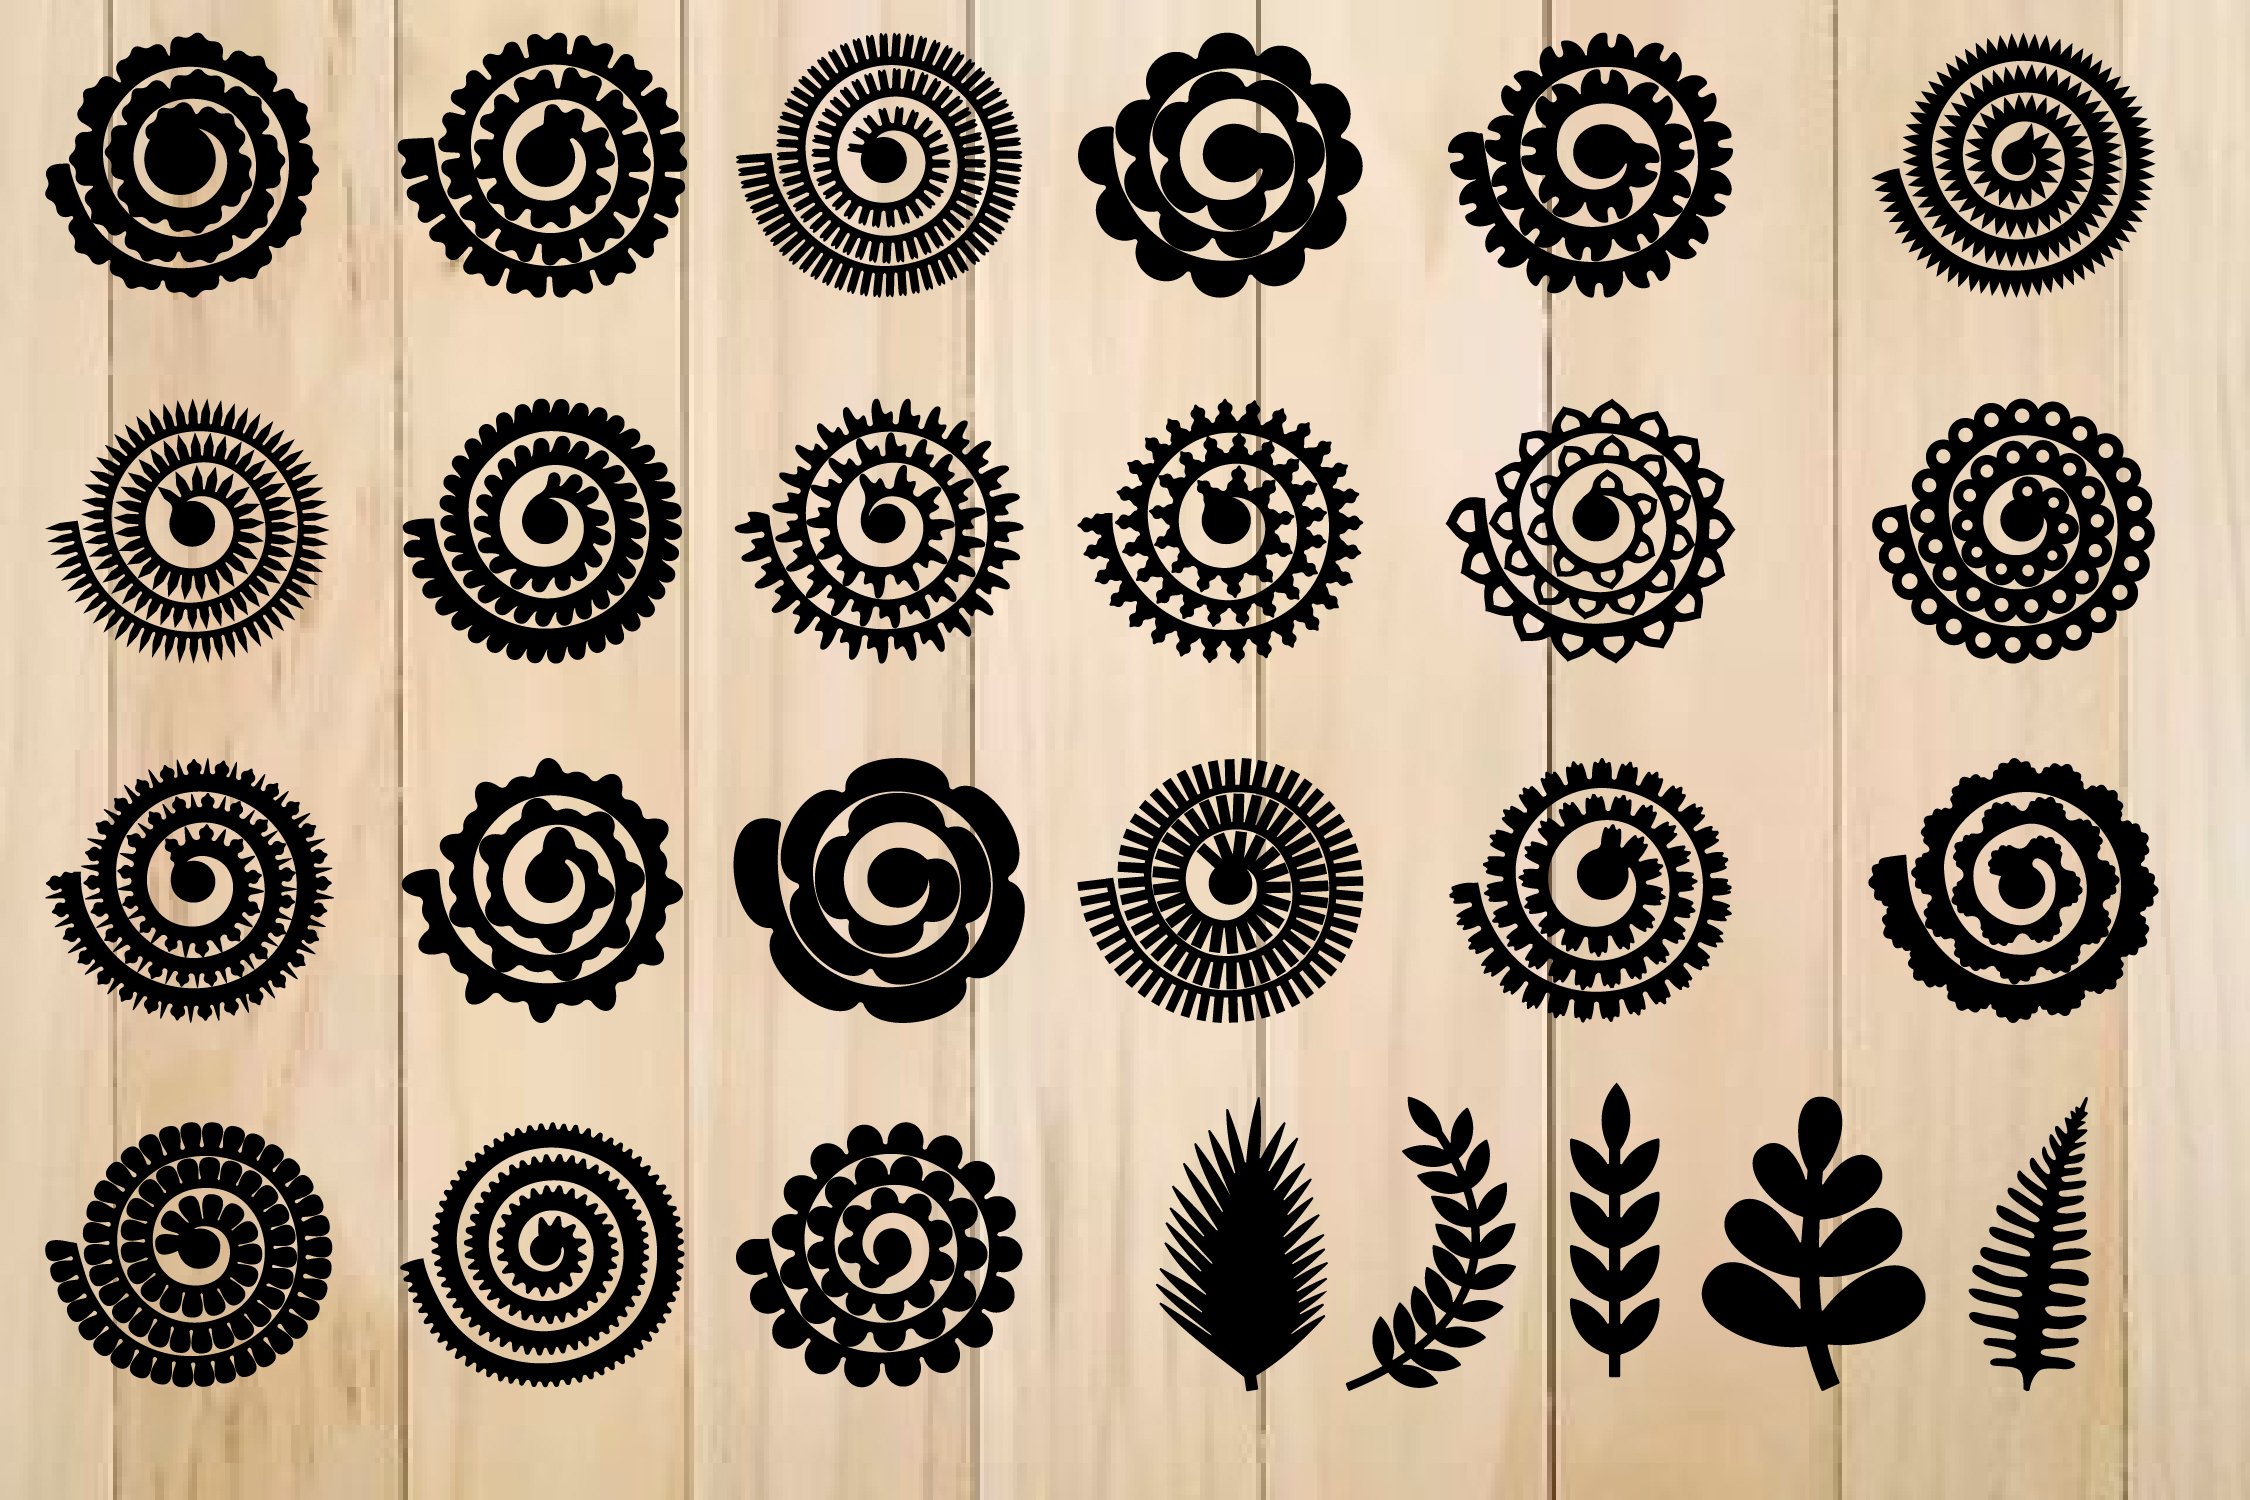 Black rolled flowers for different brands and projects on a beige wooden background.